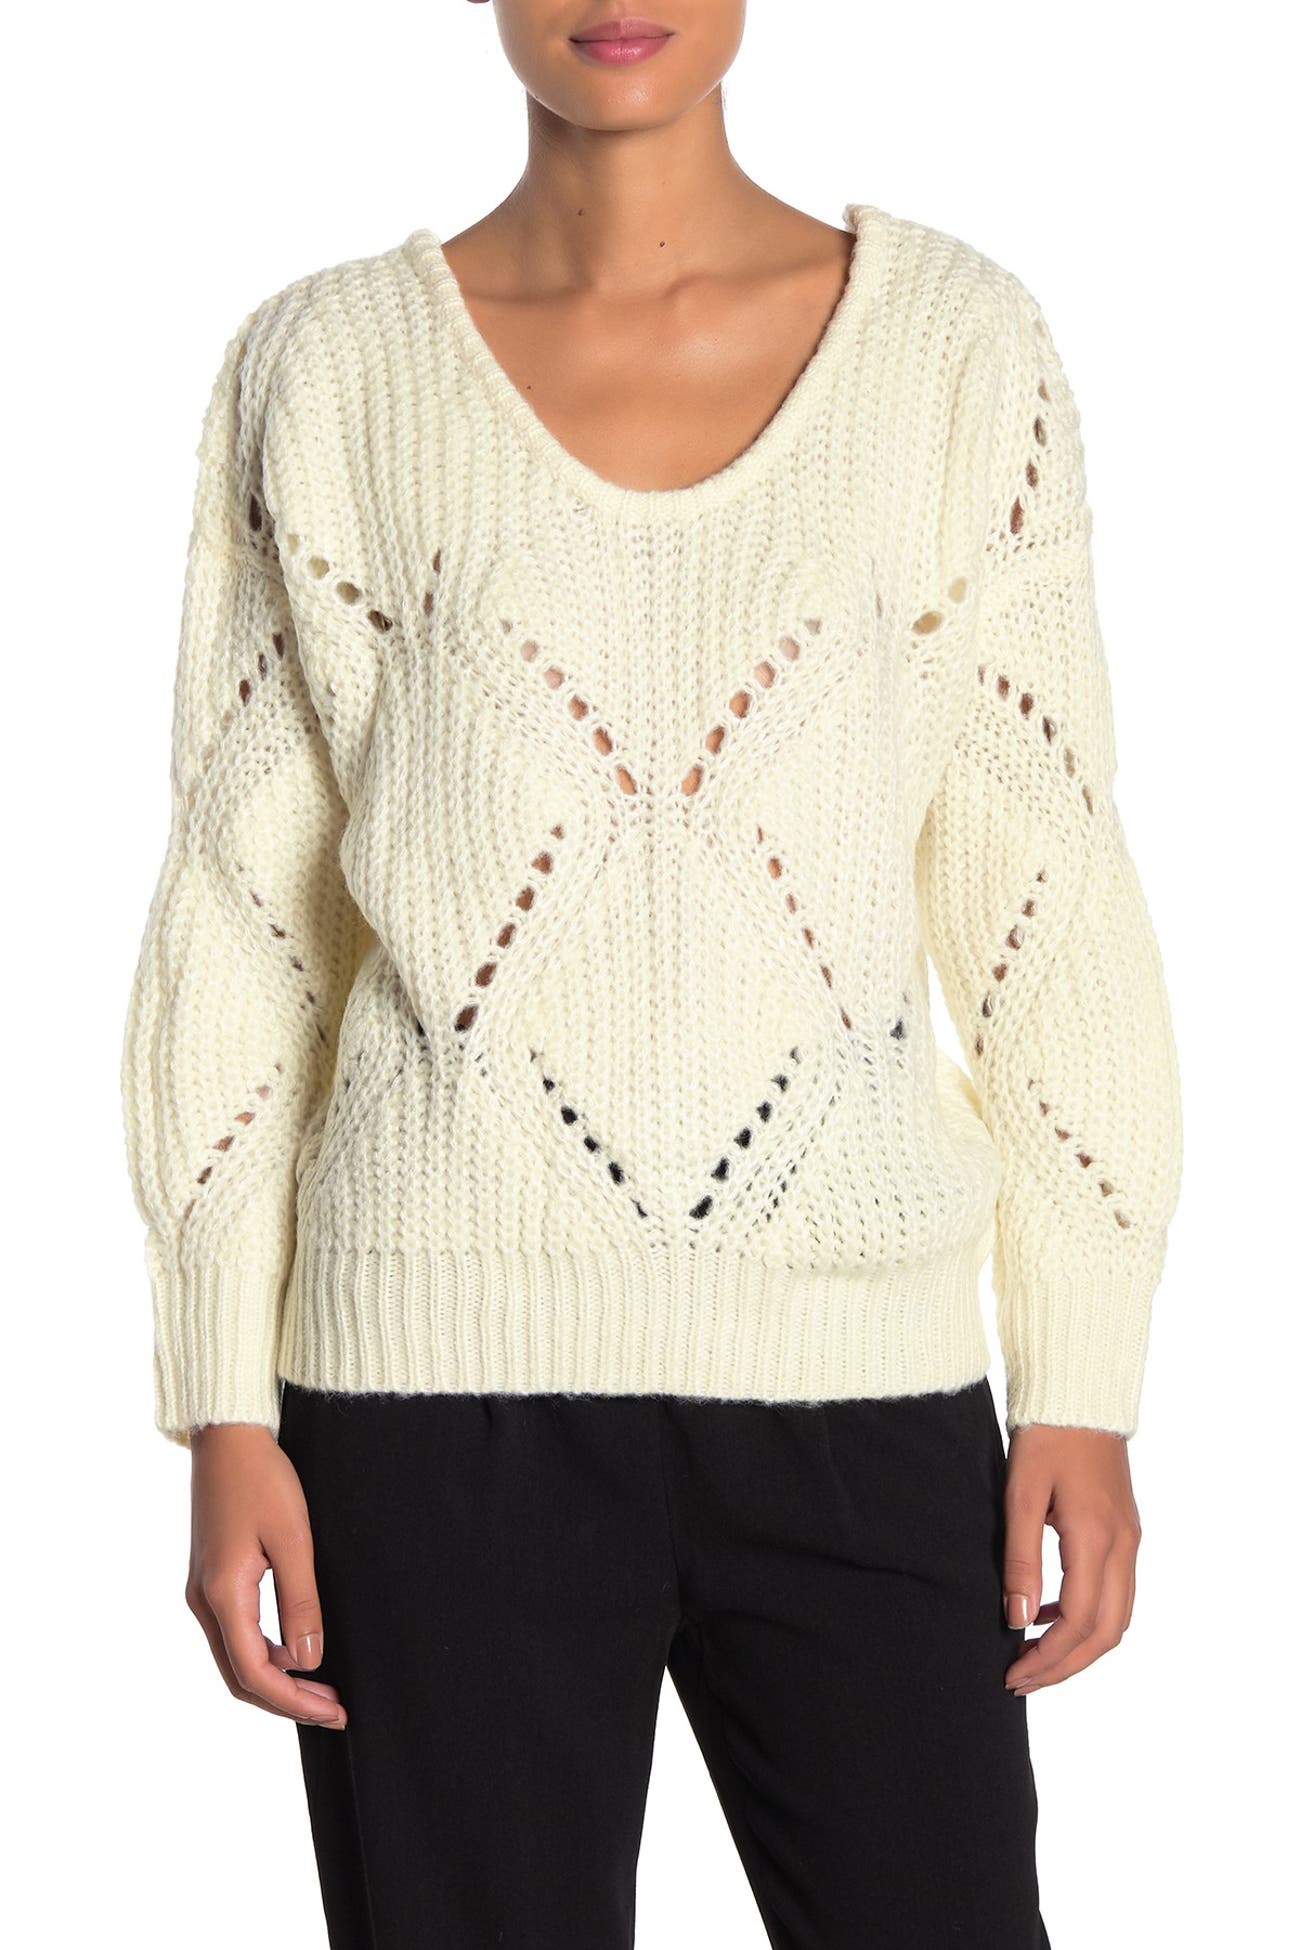 FRNCH | Open Stitch Pullover Sweater | Nordstrom Rack